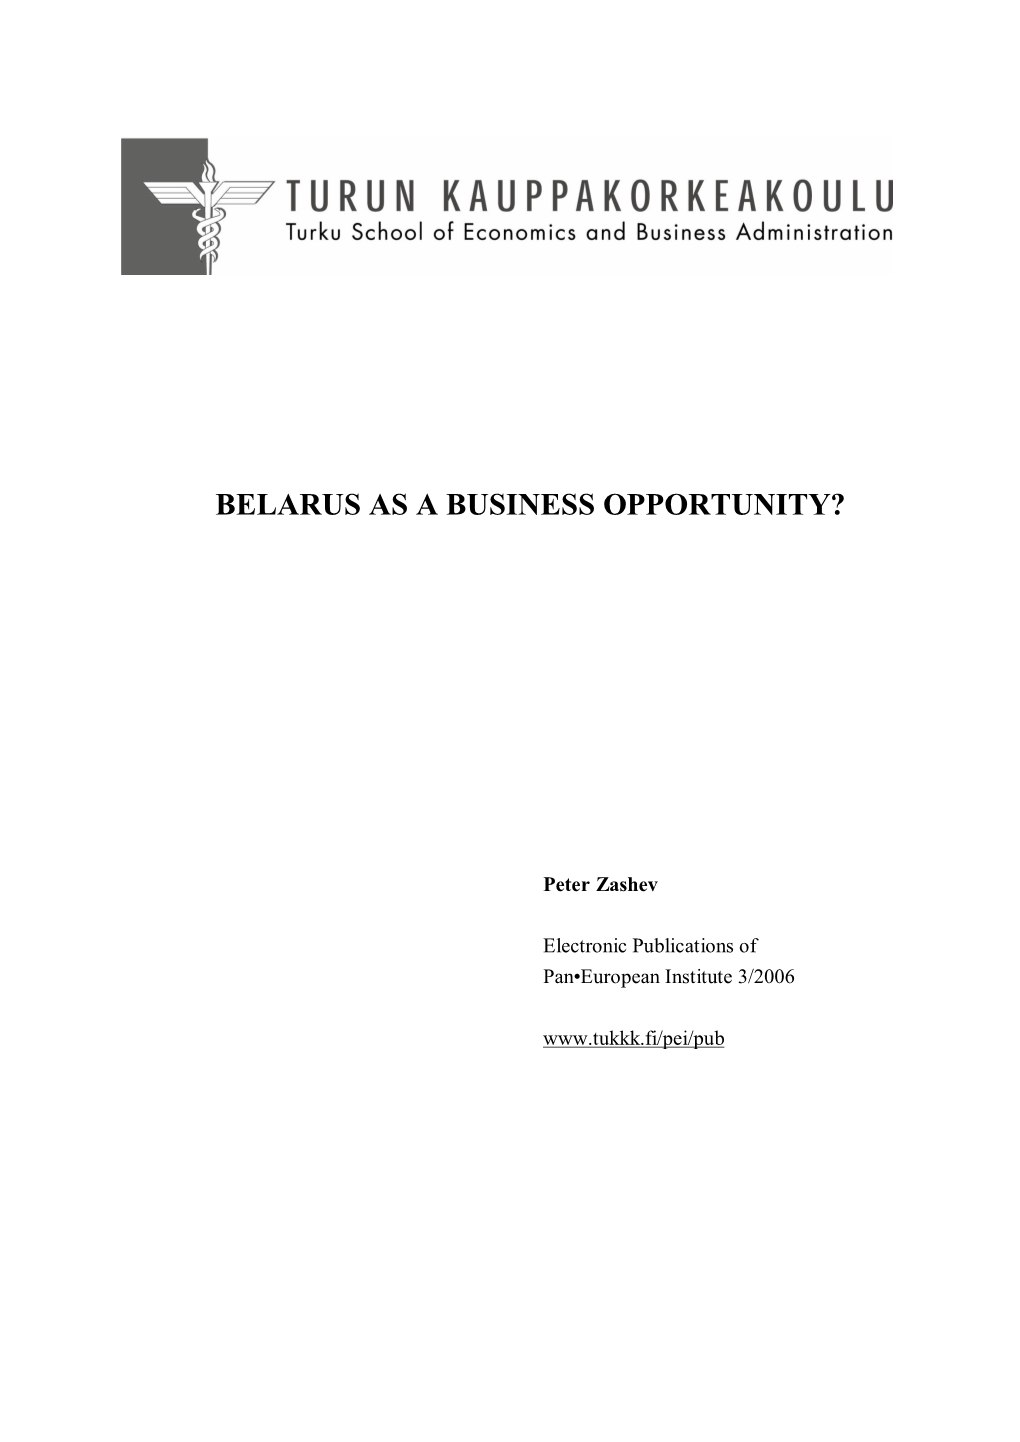 Belarus As a Business Opportunity?